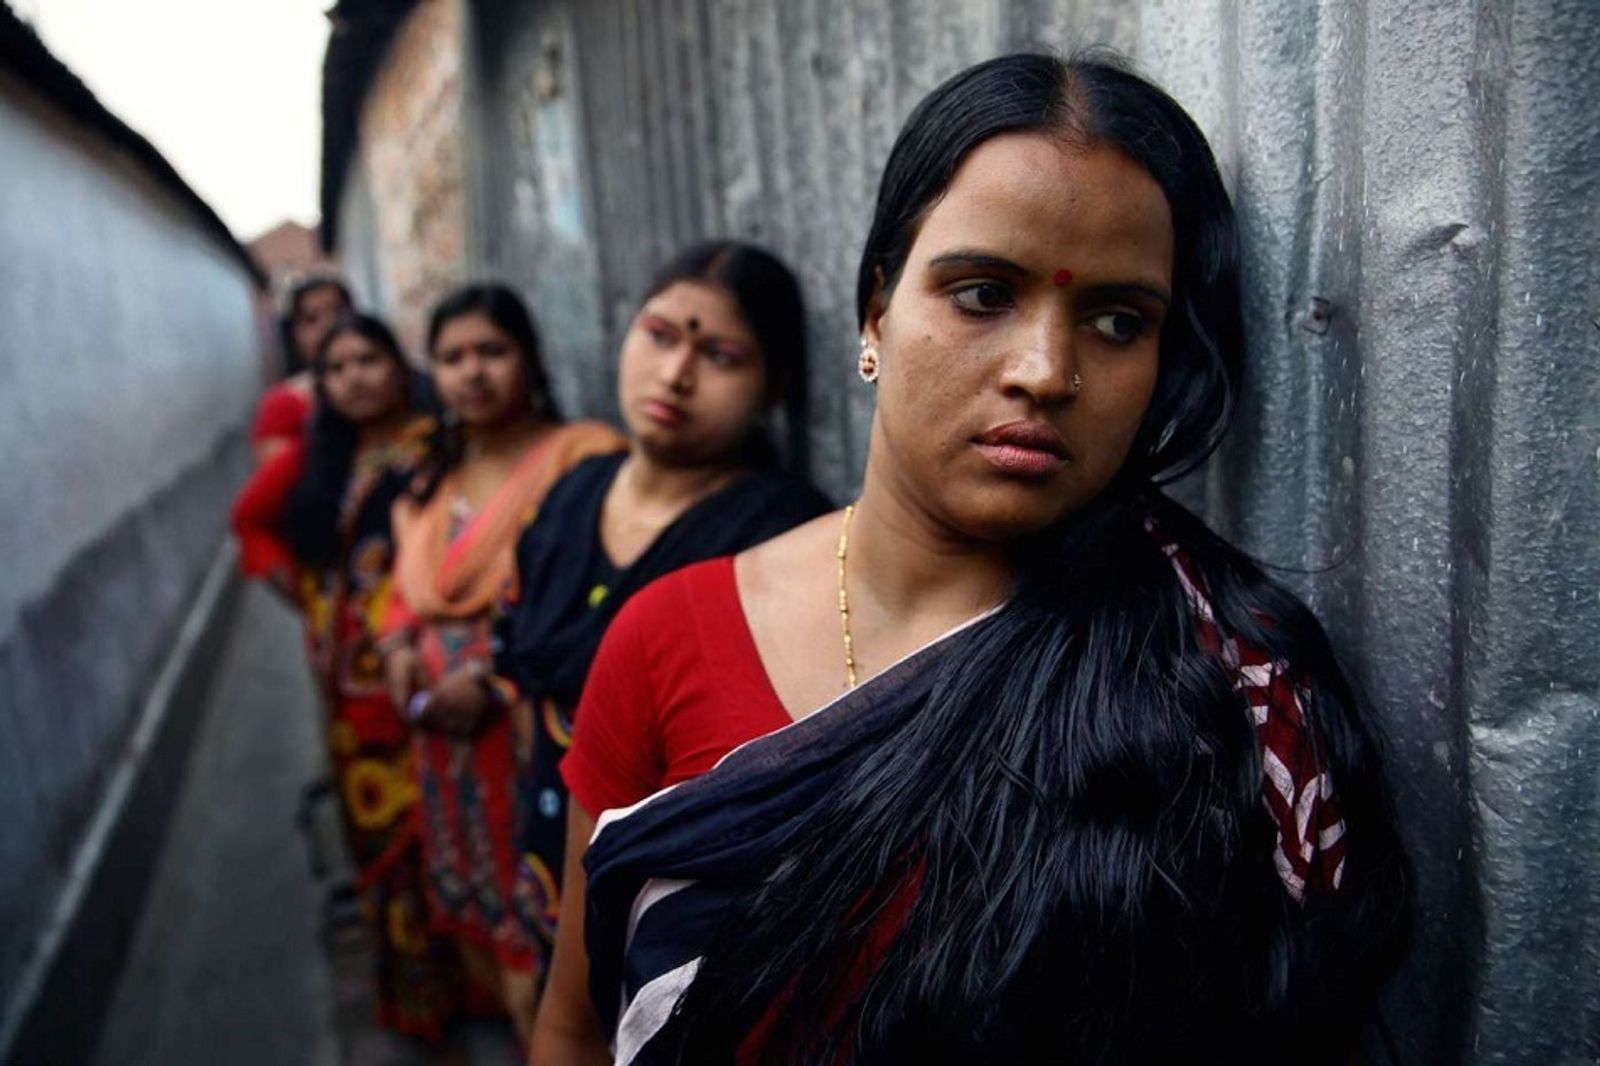 © Souvid Datta, from the series Sonagachi: Vanishing Girls. (Recipient of a 2015 Getty Images Editorial Grant)